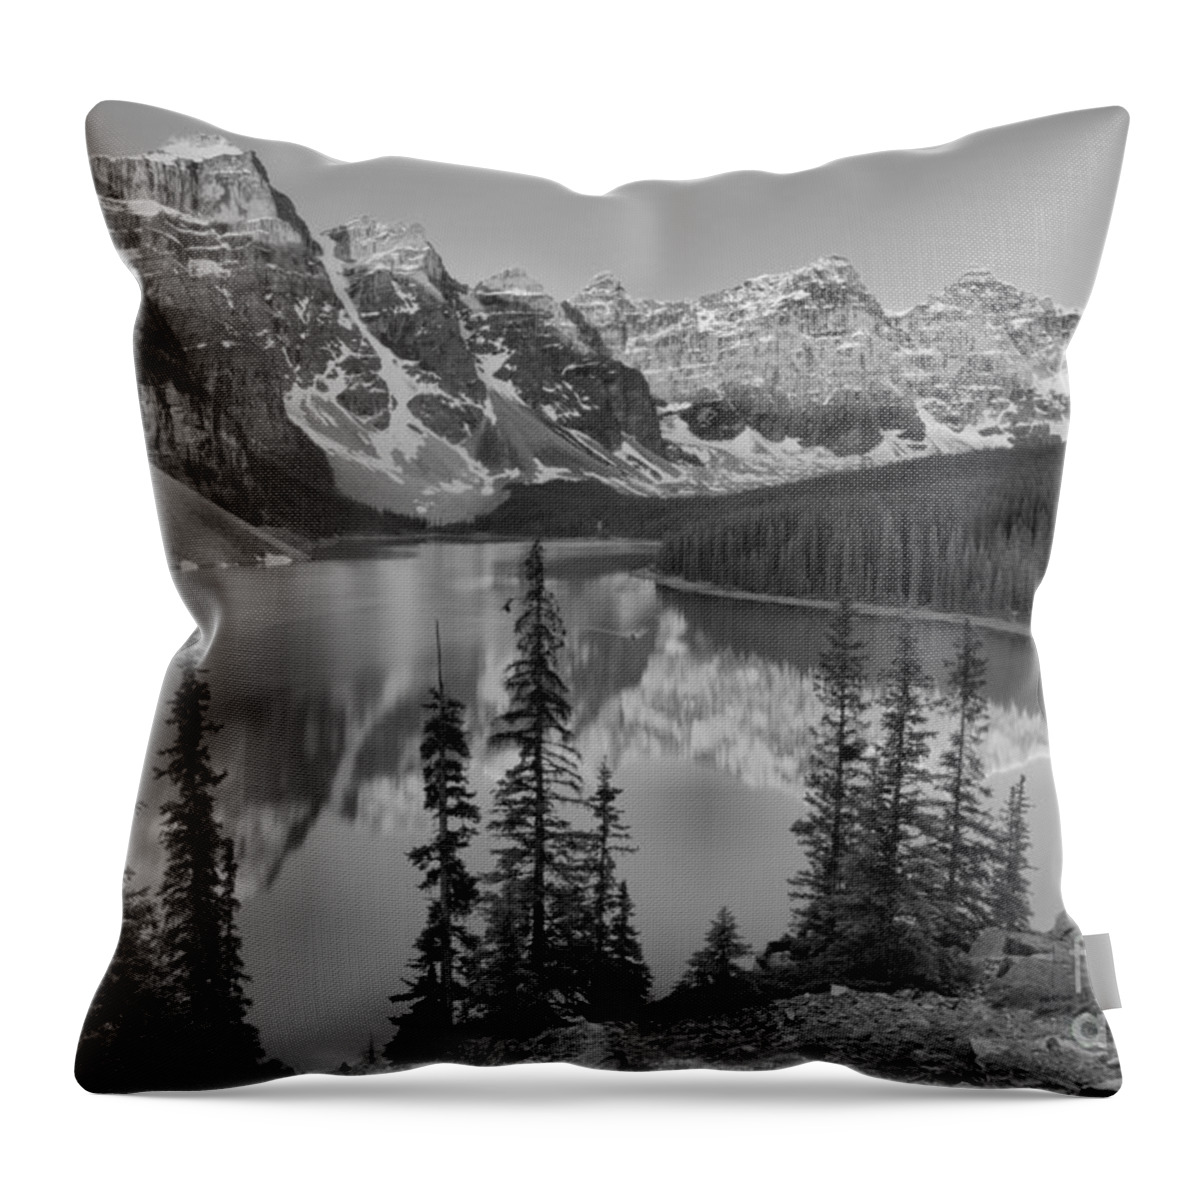 Moraine Lake Throw Pillow featuring the photograph Red Morning Peaks At Moraine Lake Black And White by Adam Jewell